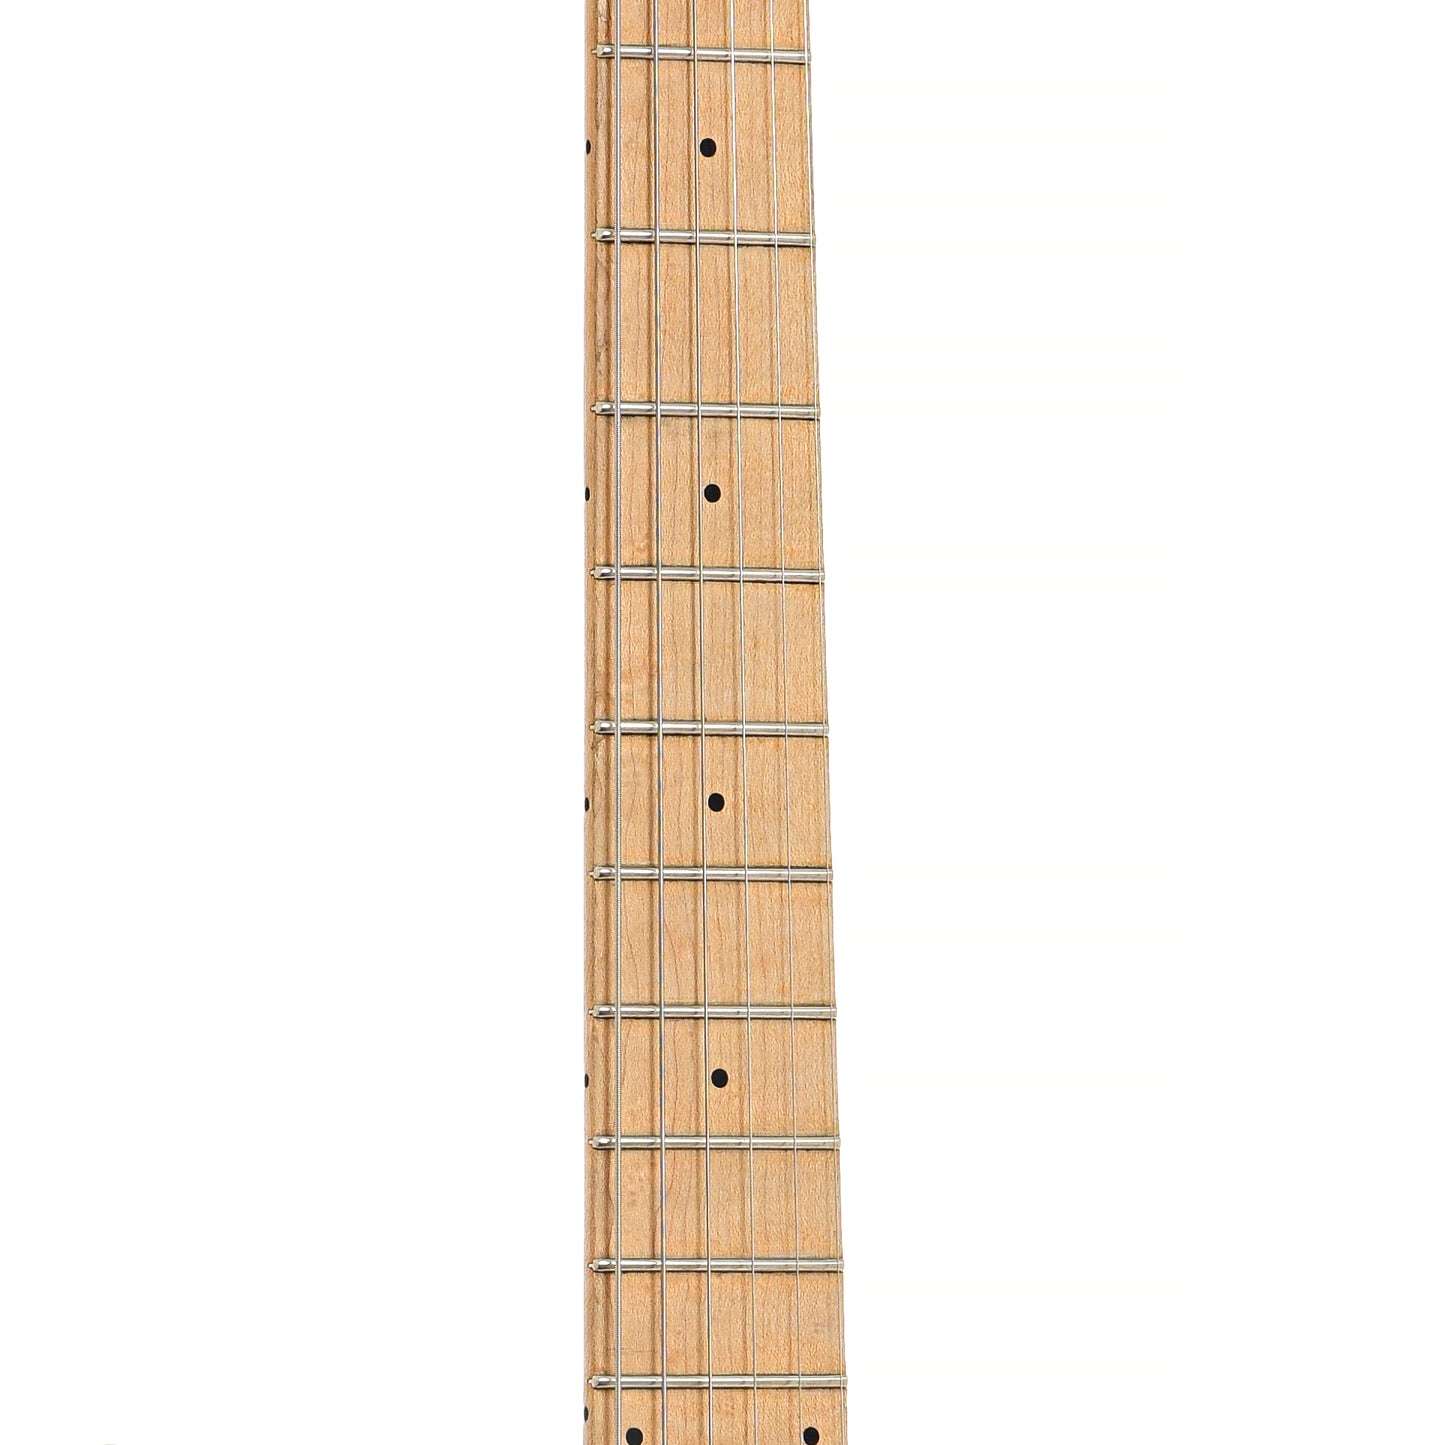 Fretboard of Ernie Ball Music Man Silhouette Special MB20 Hardtail